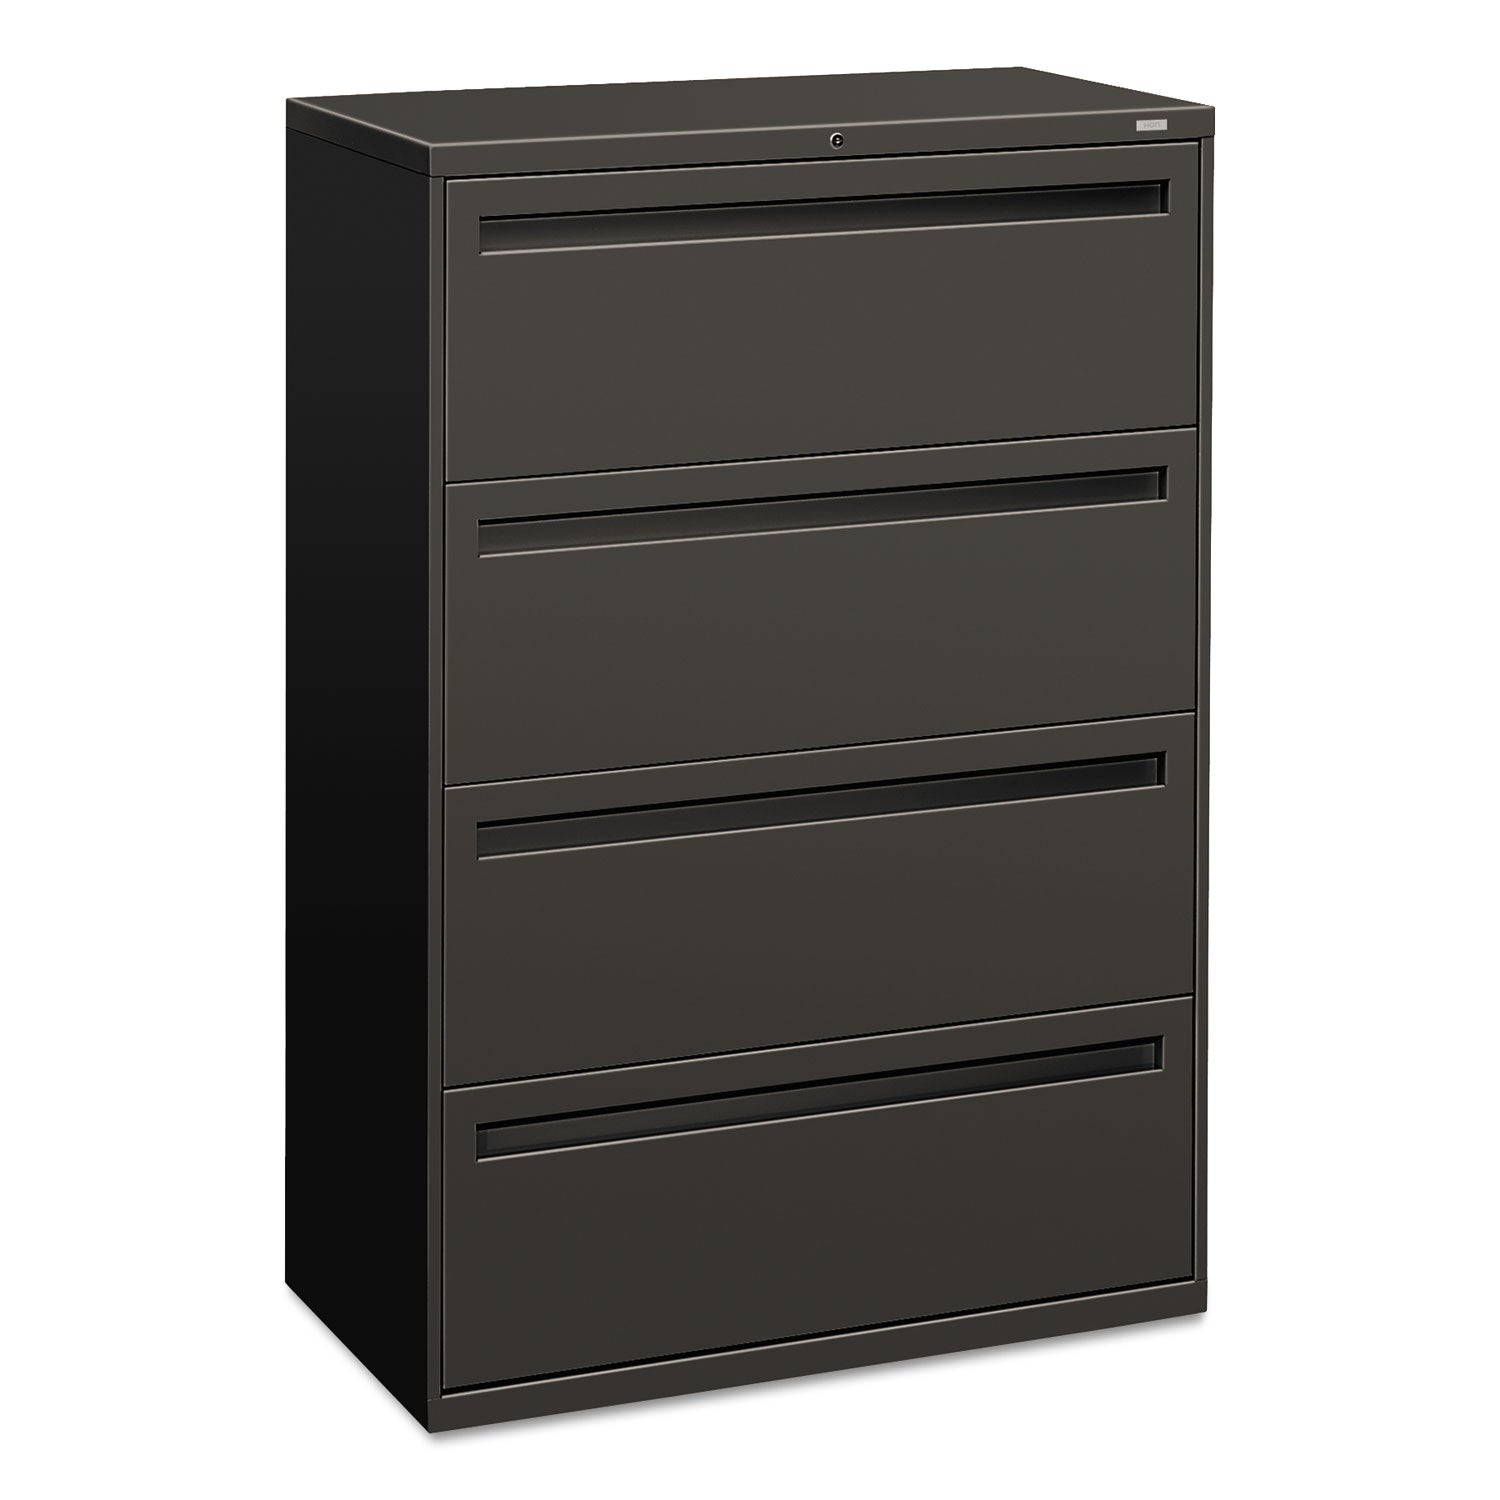 Brigade 700 Series Lateral File, 4 Legal/Letter-Size File Drawers, Charcoal, 36" x 18" x 52.5 - 